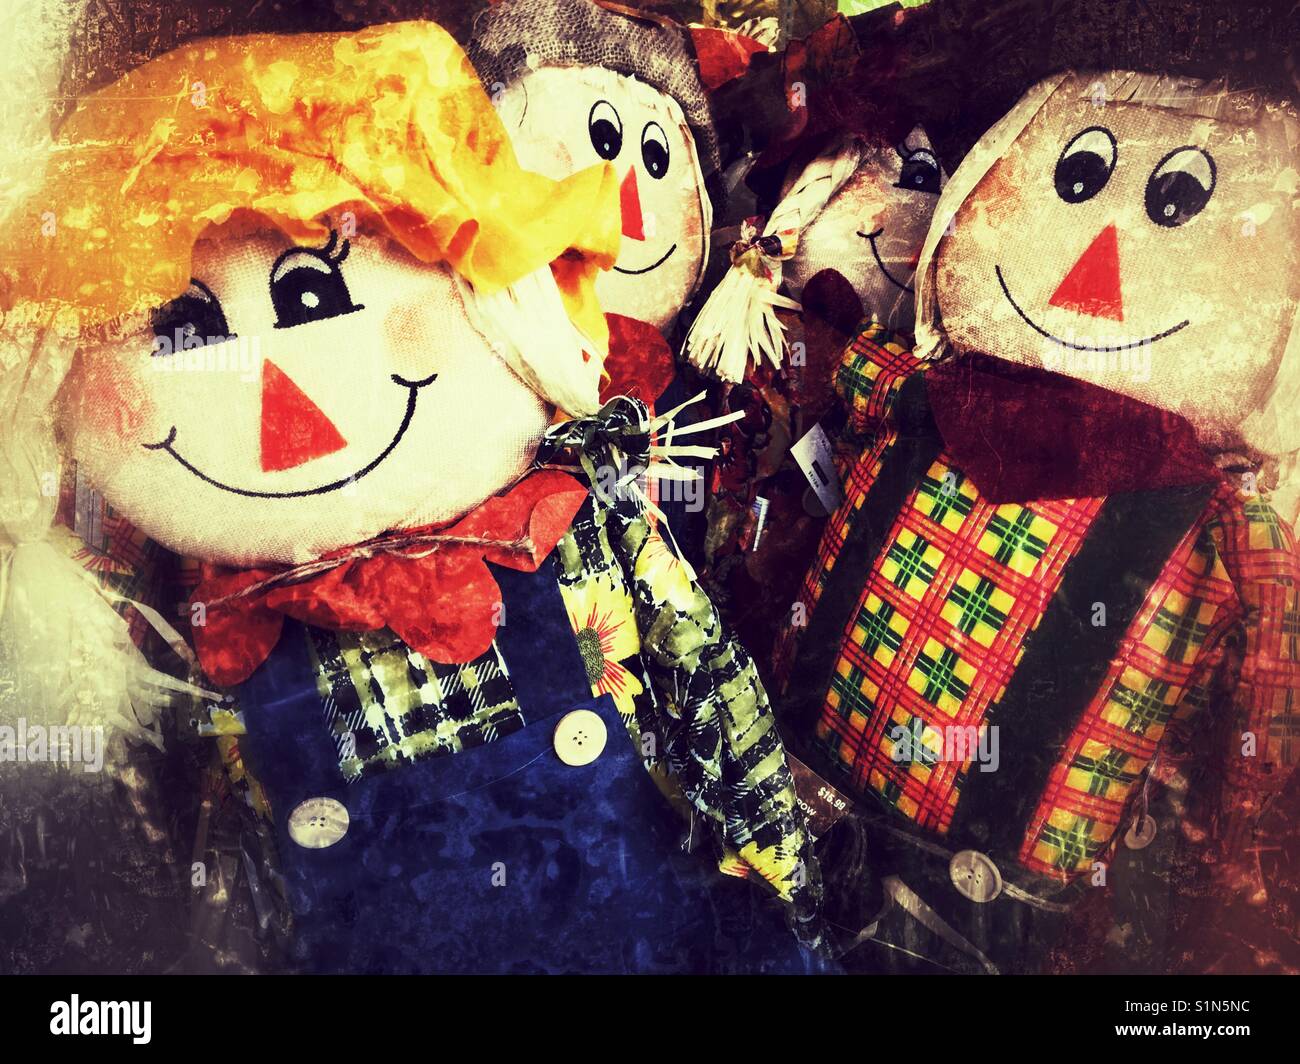 Mass produced smiling scare crow decoration dolls. Stock Photo